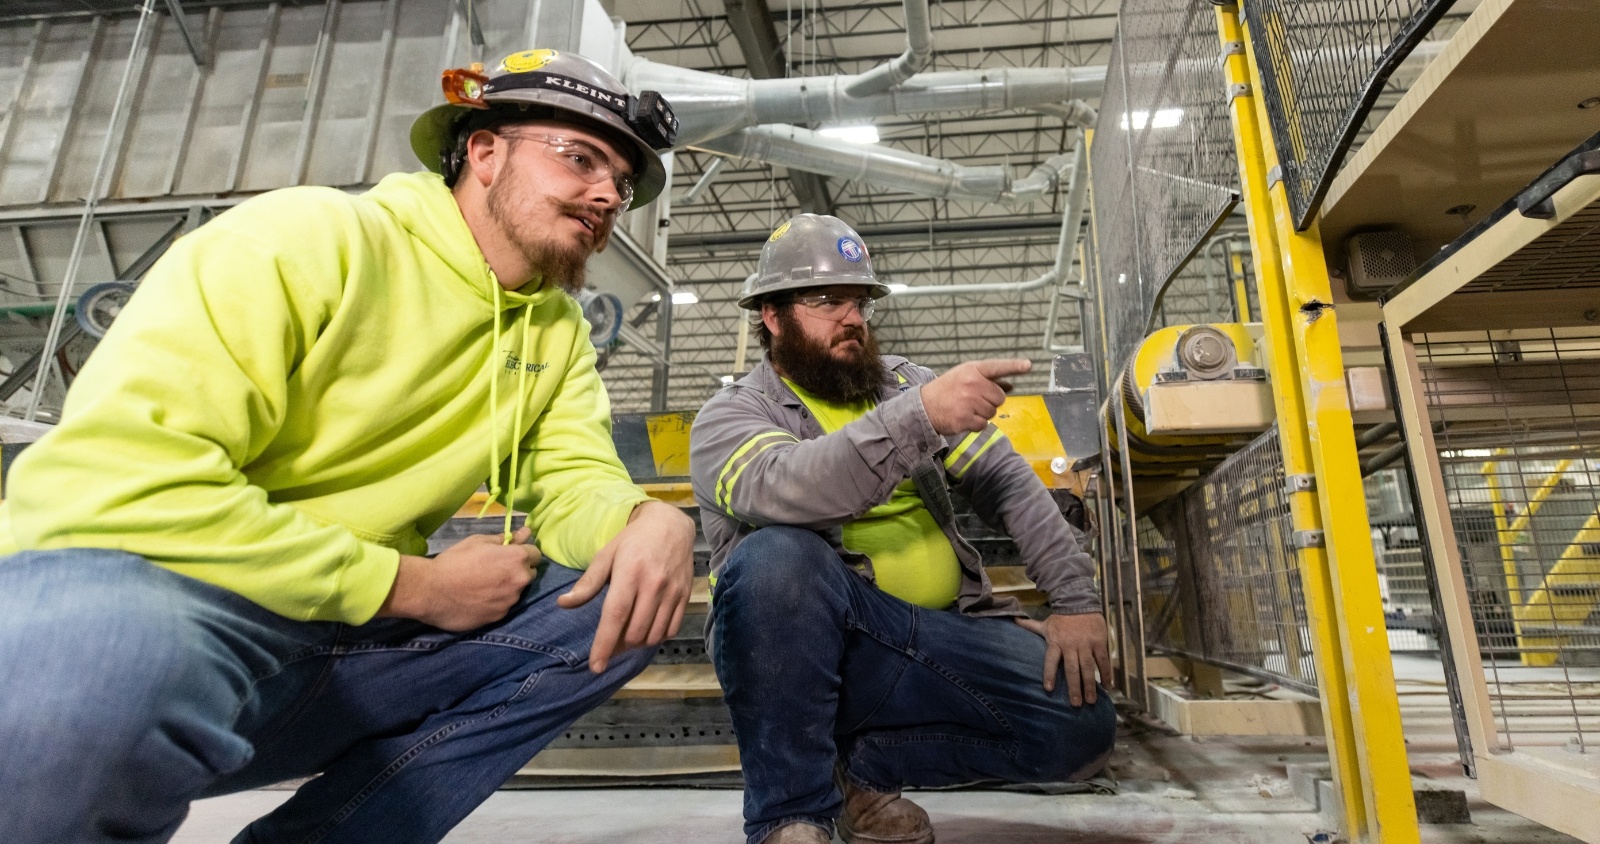 Electricians sitting on floor of industrial facility